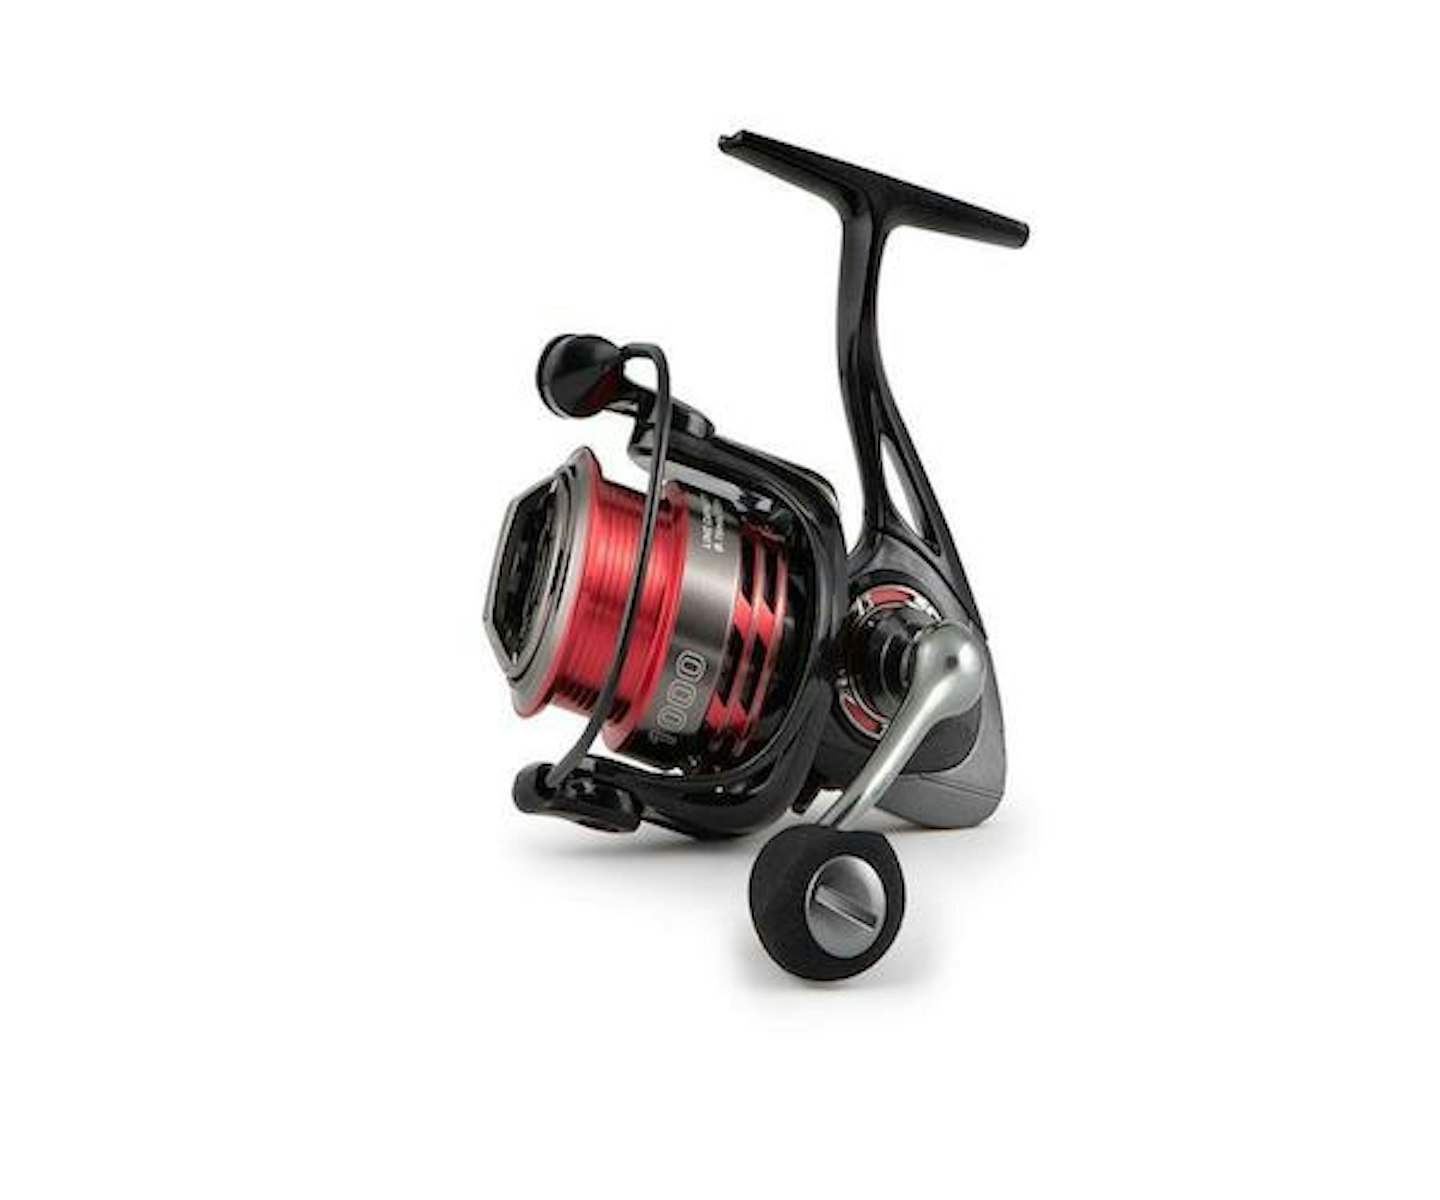 The best spinning reels